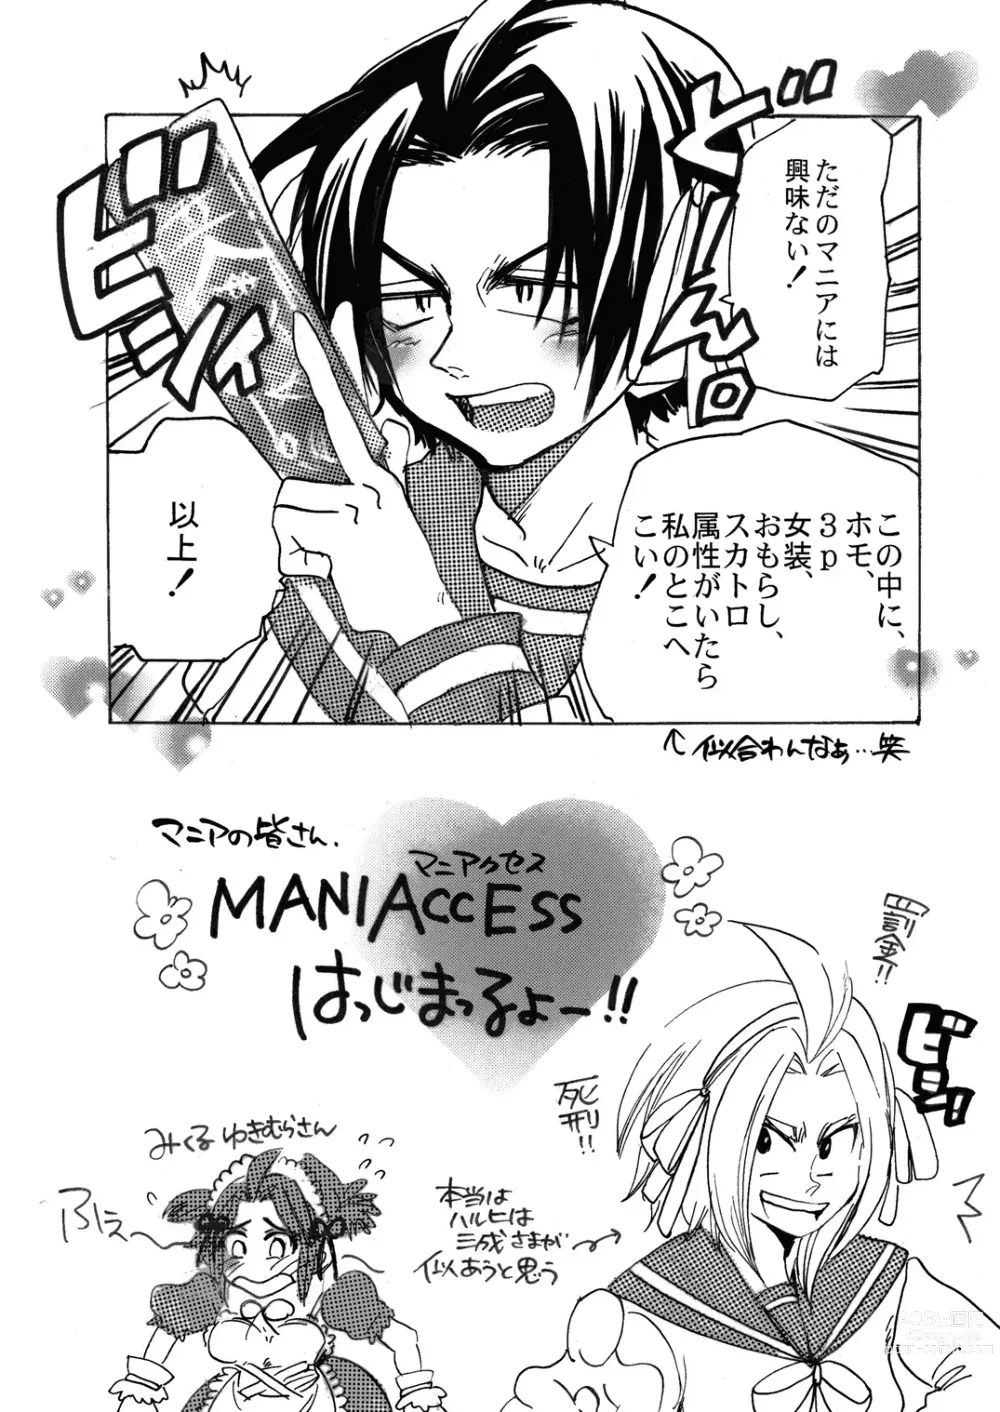 Page 2 of doujinshi MANIACCESS